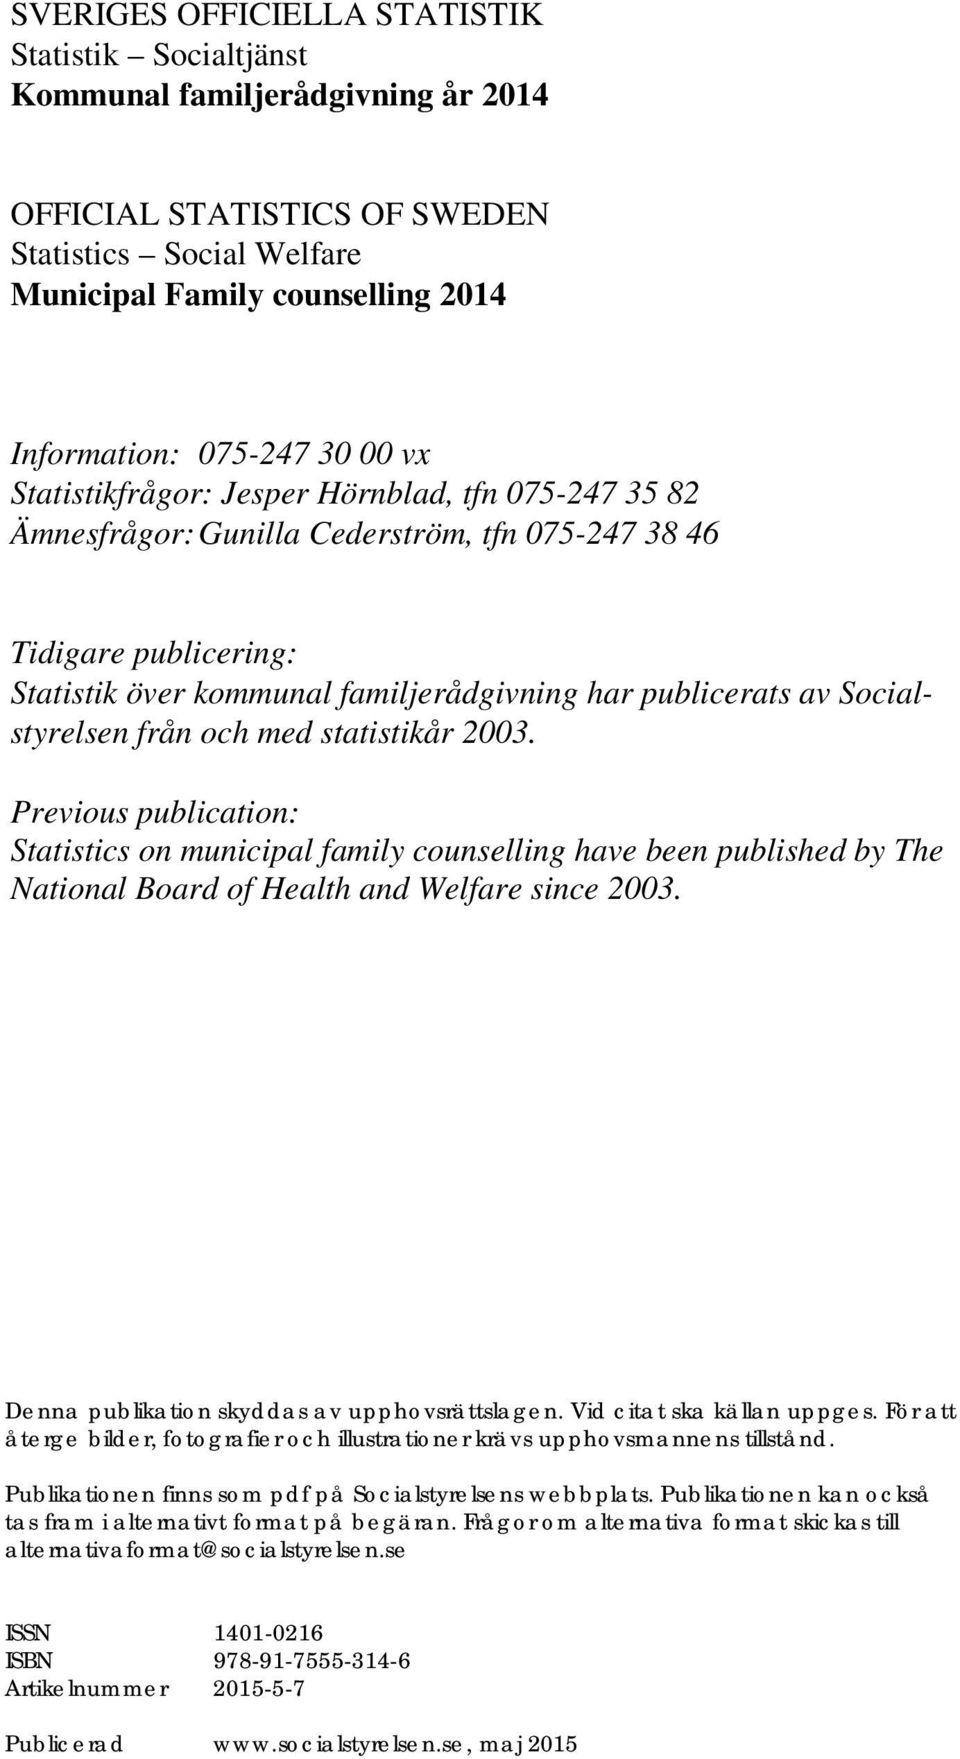 Socialstyrelsen från och med statistikår 2003. Previous publication: Statistics on municipal family counselling have been published by The National Board of Health and Welfare since 2003.